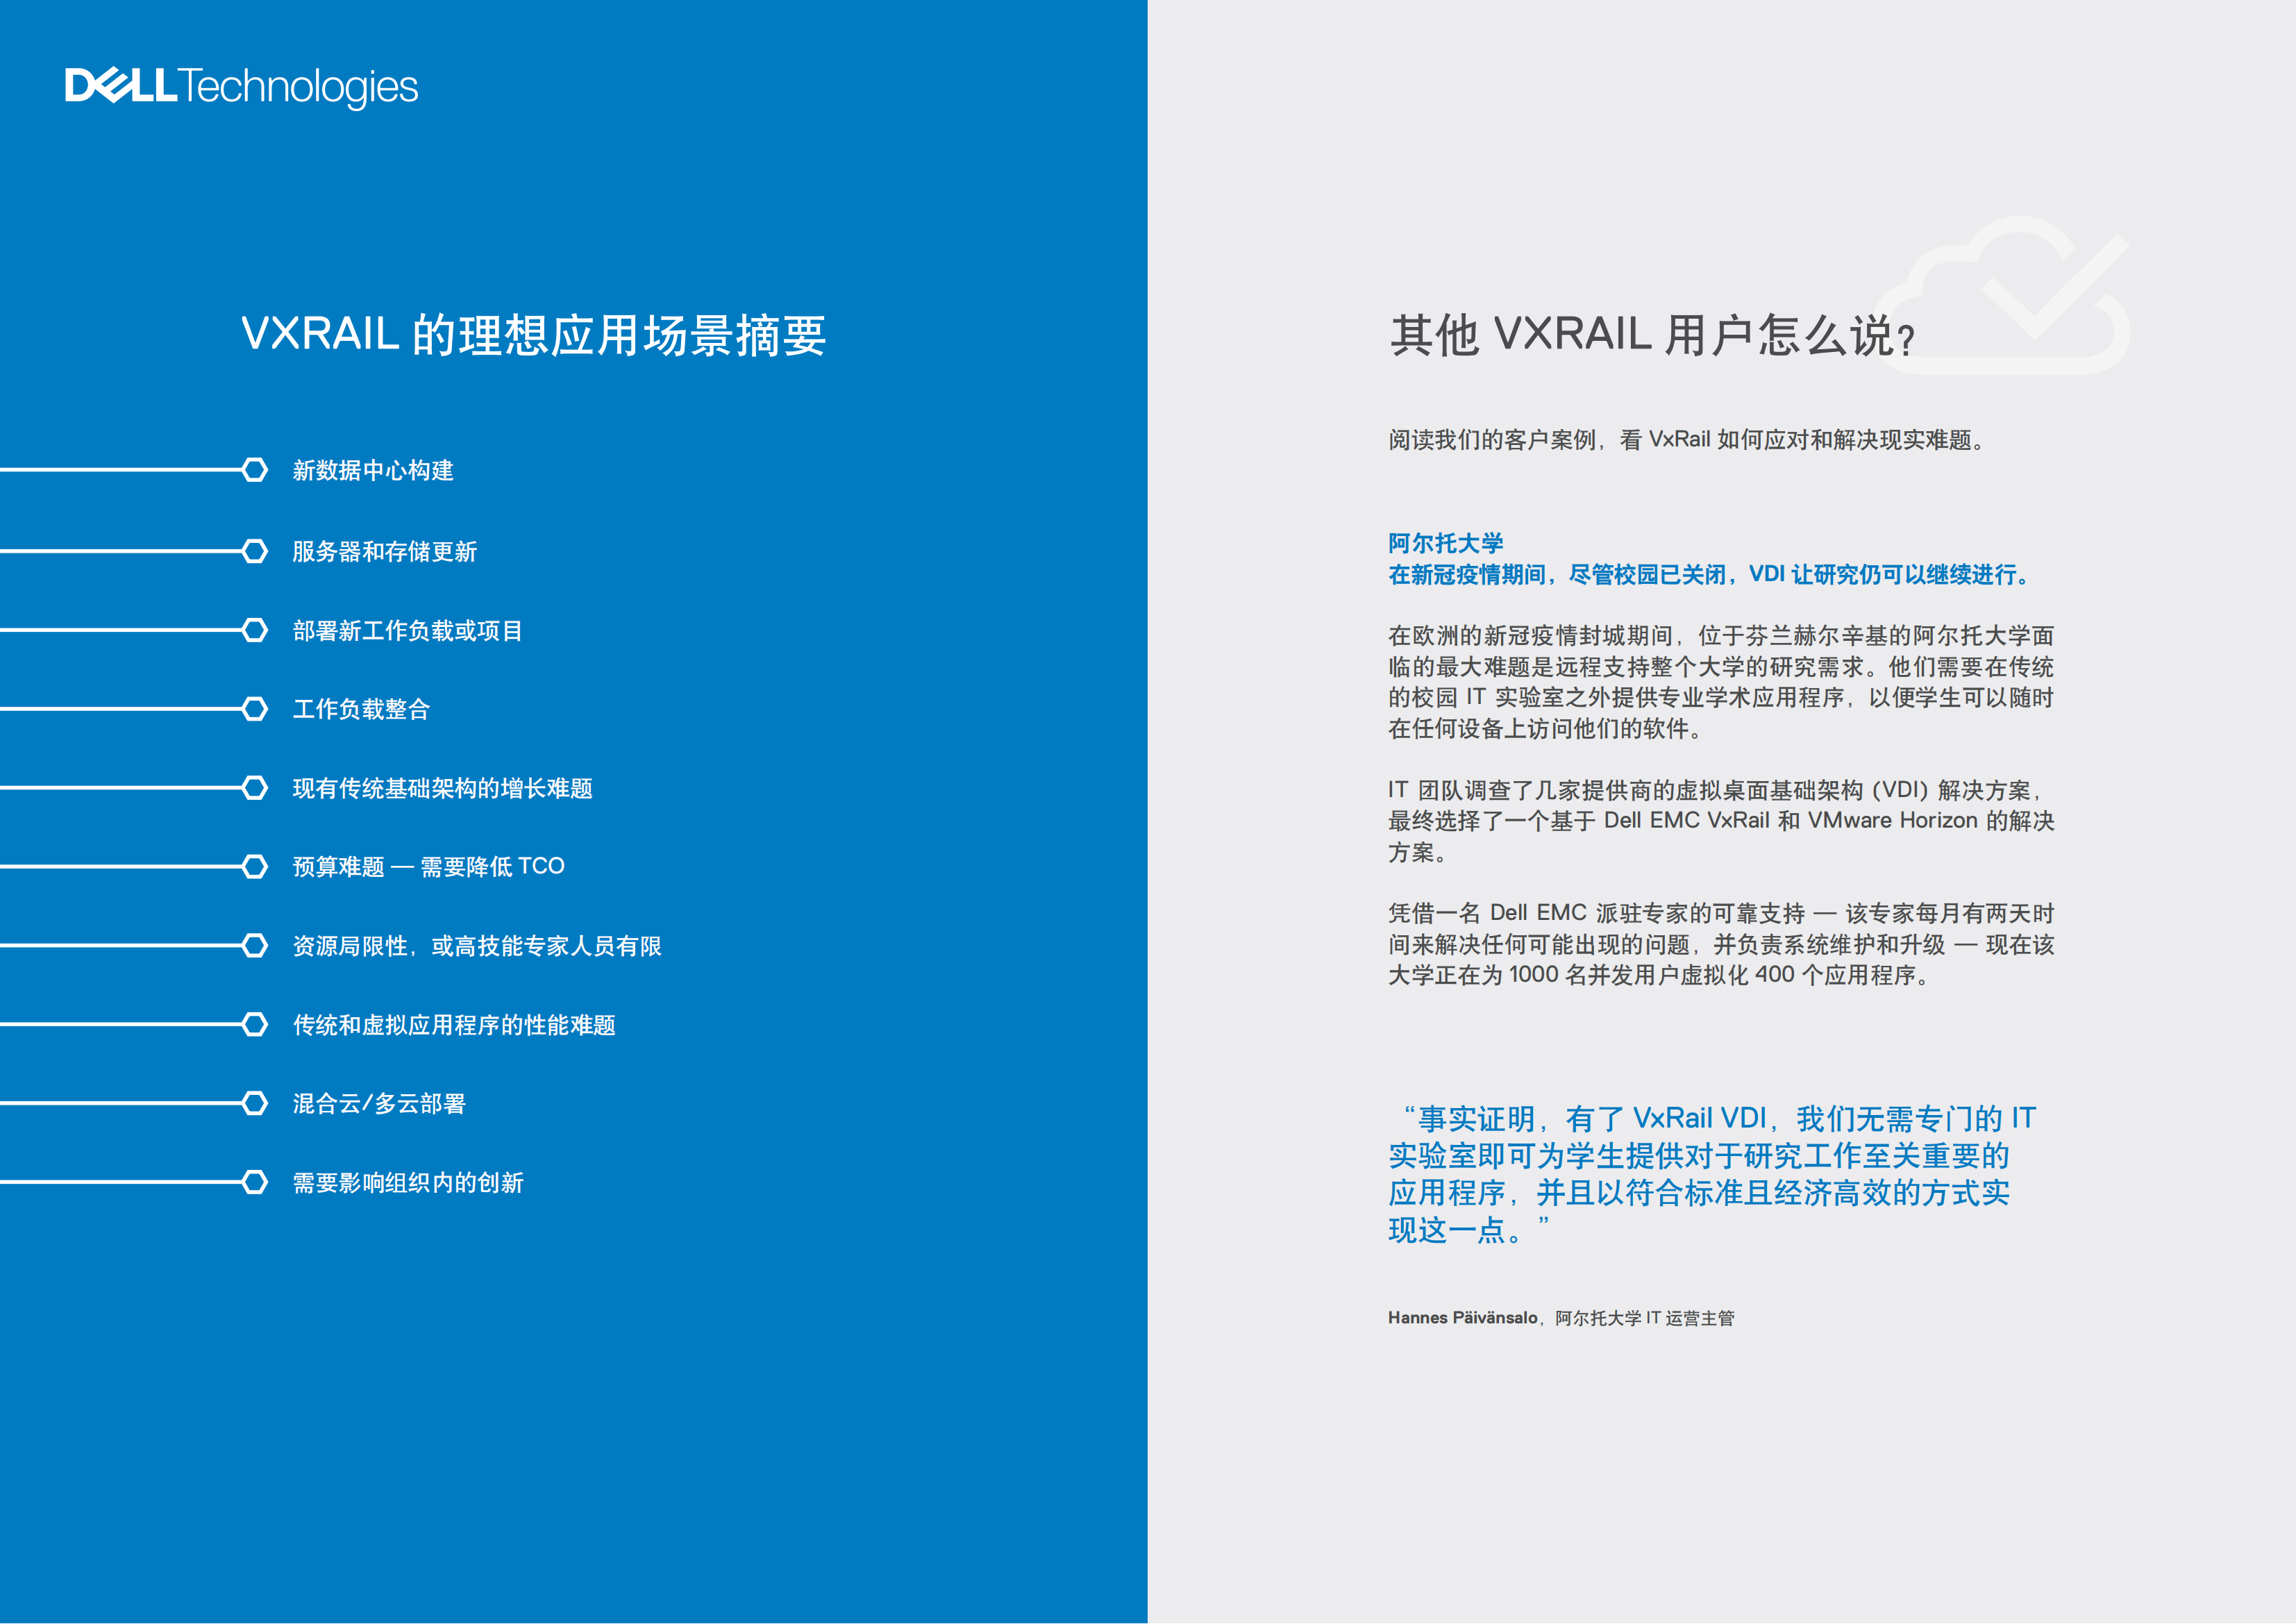 vxrail-customer-brochure-modernize-your-it-operations-with-dell-emc-vxrail(2)_11.png